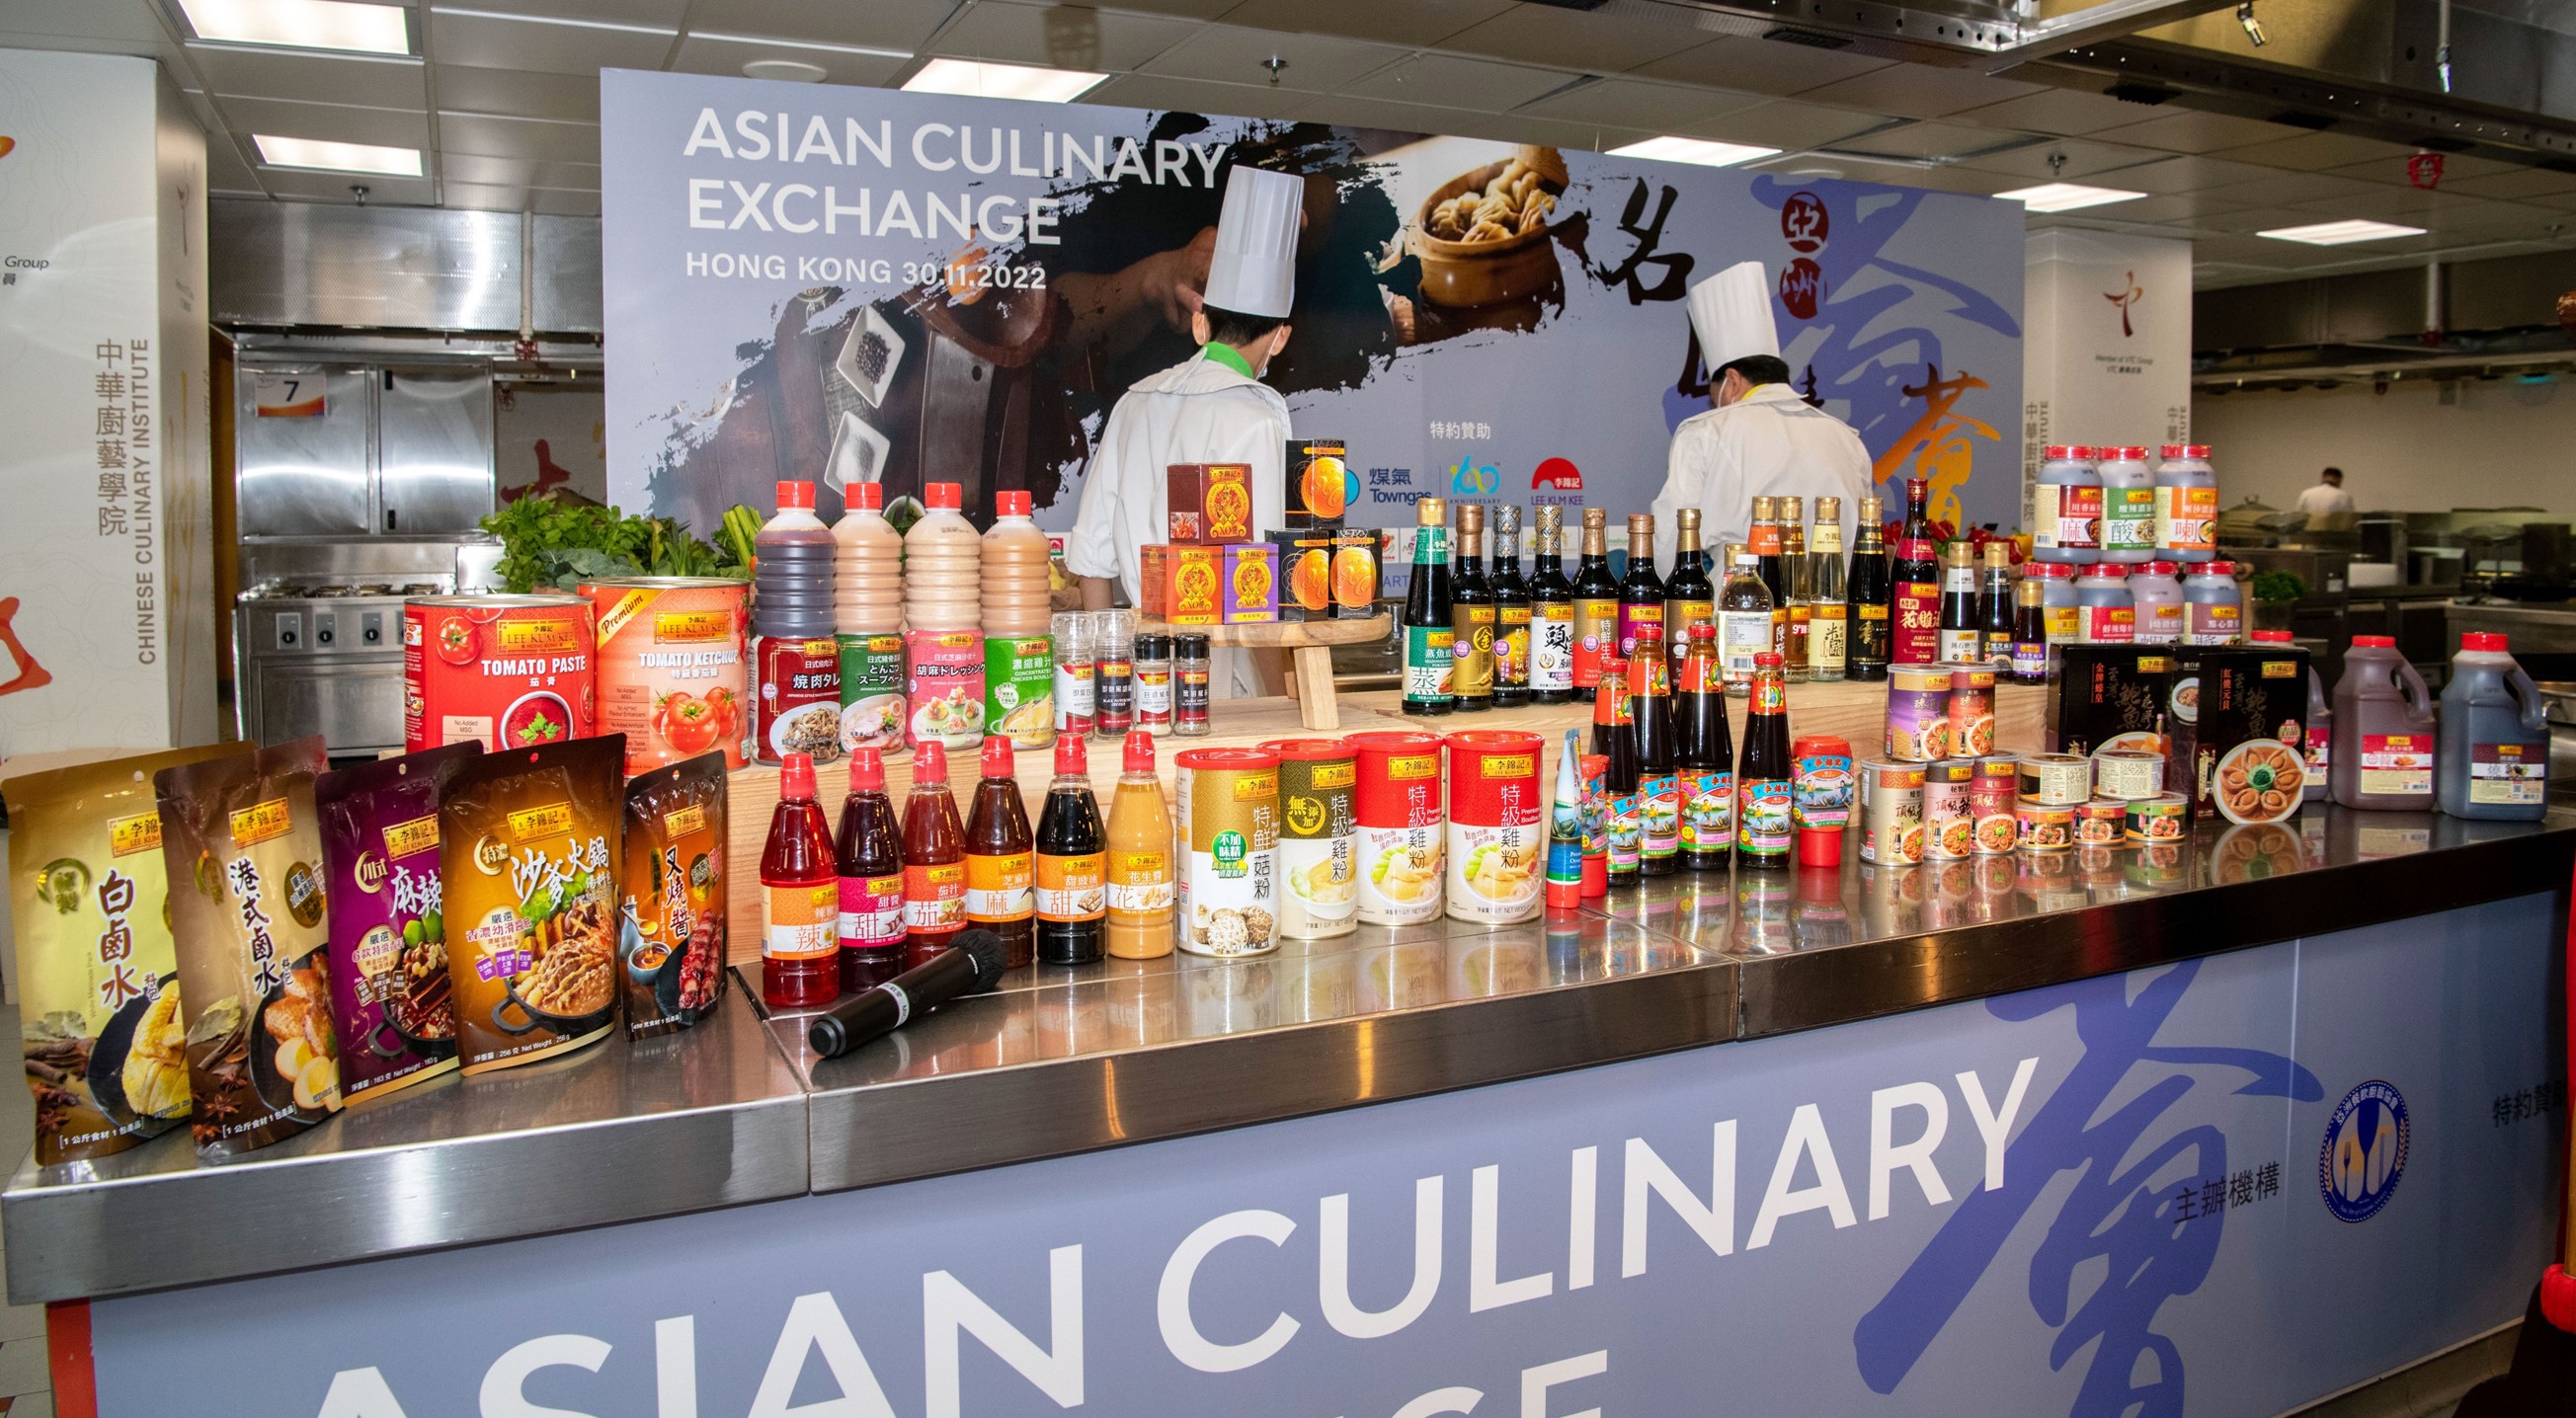 Lee Kum Kee Supports the 15th Asian Culinary Exchange